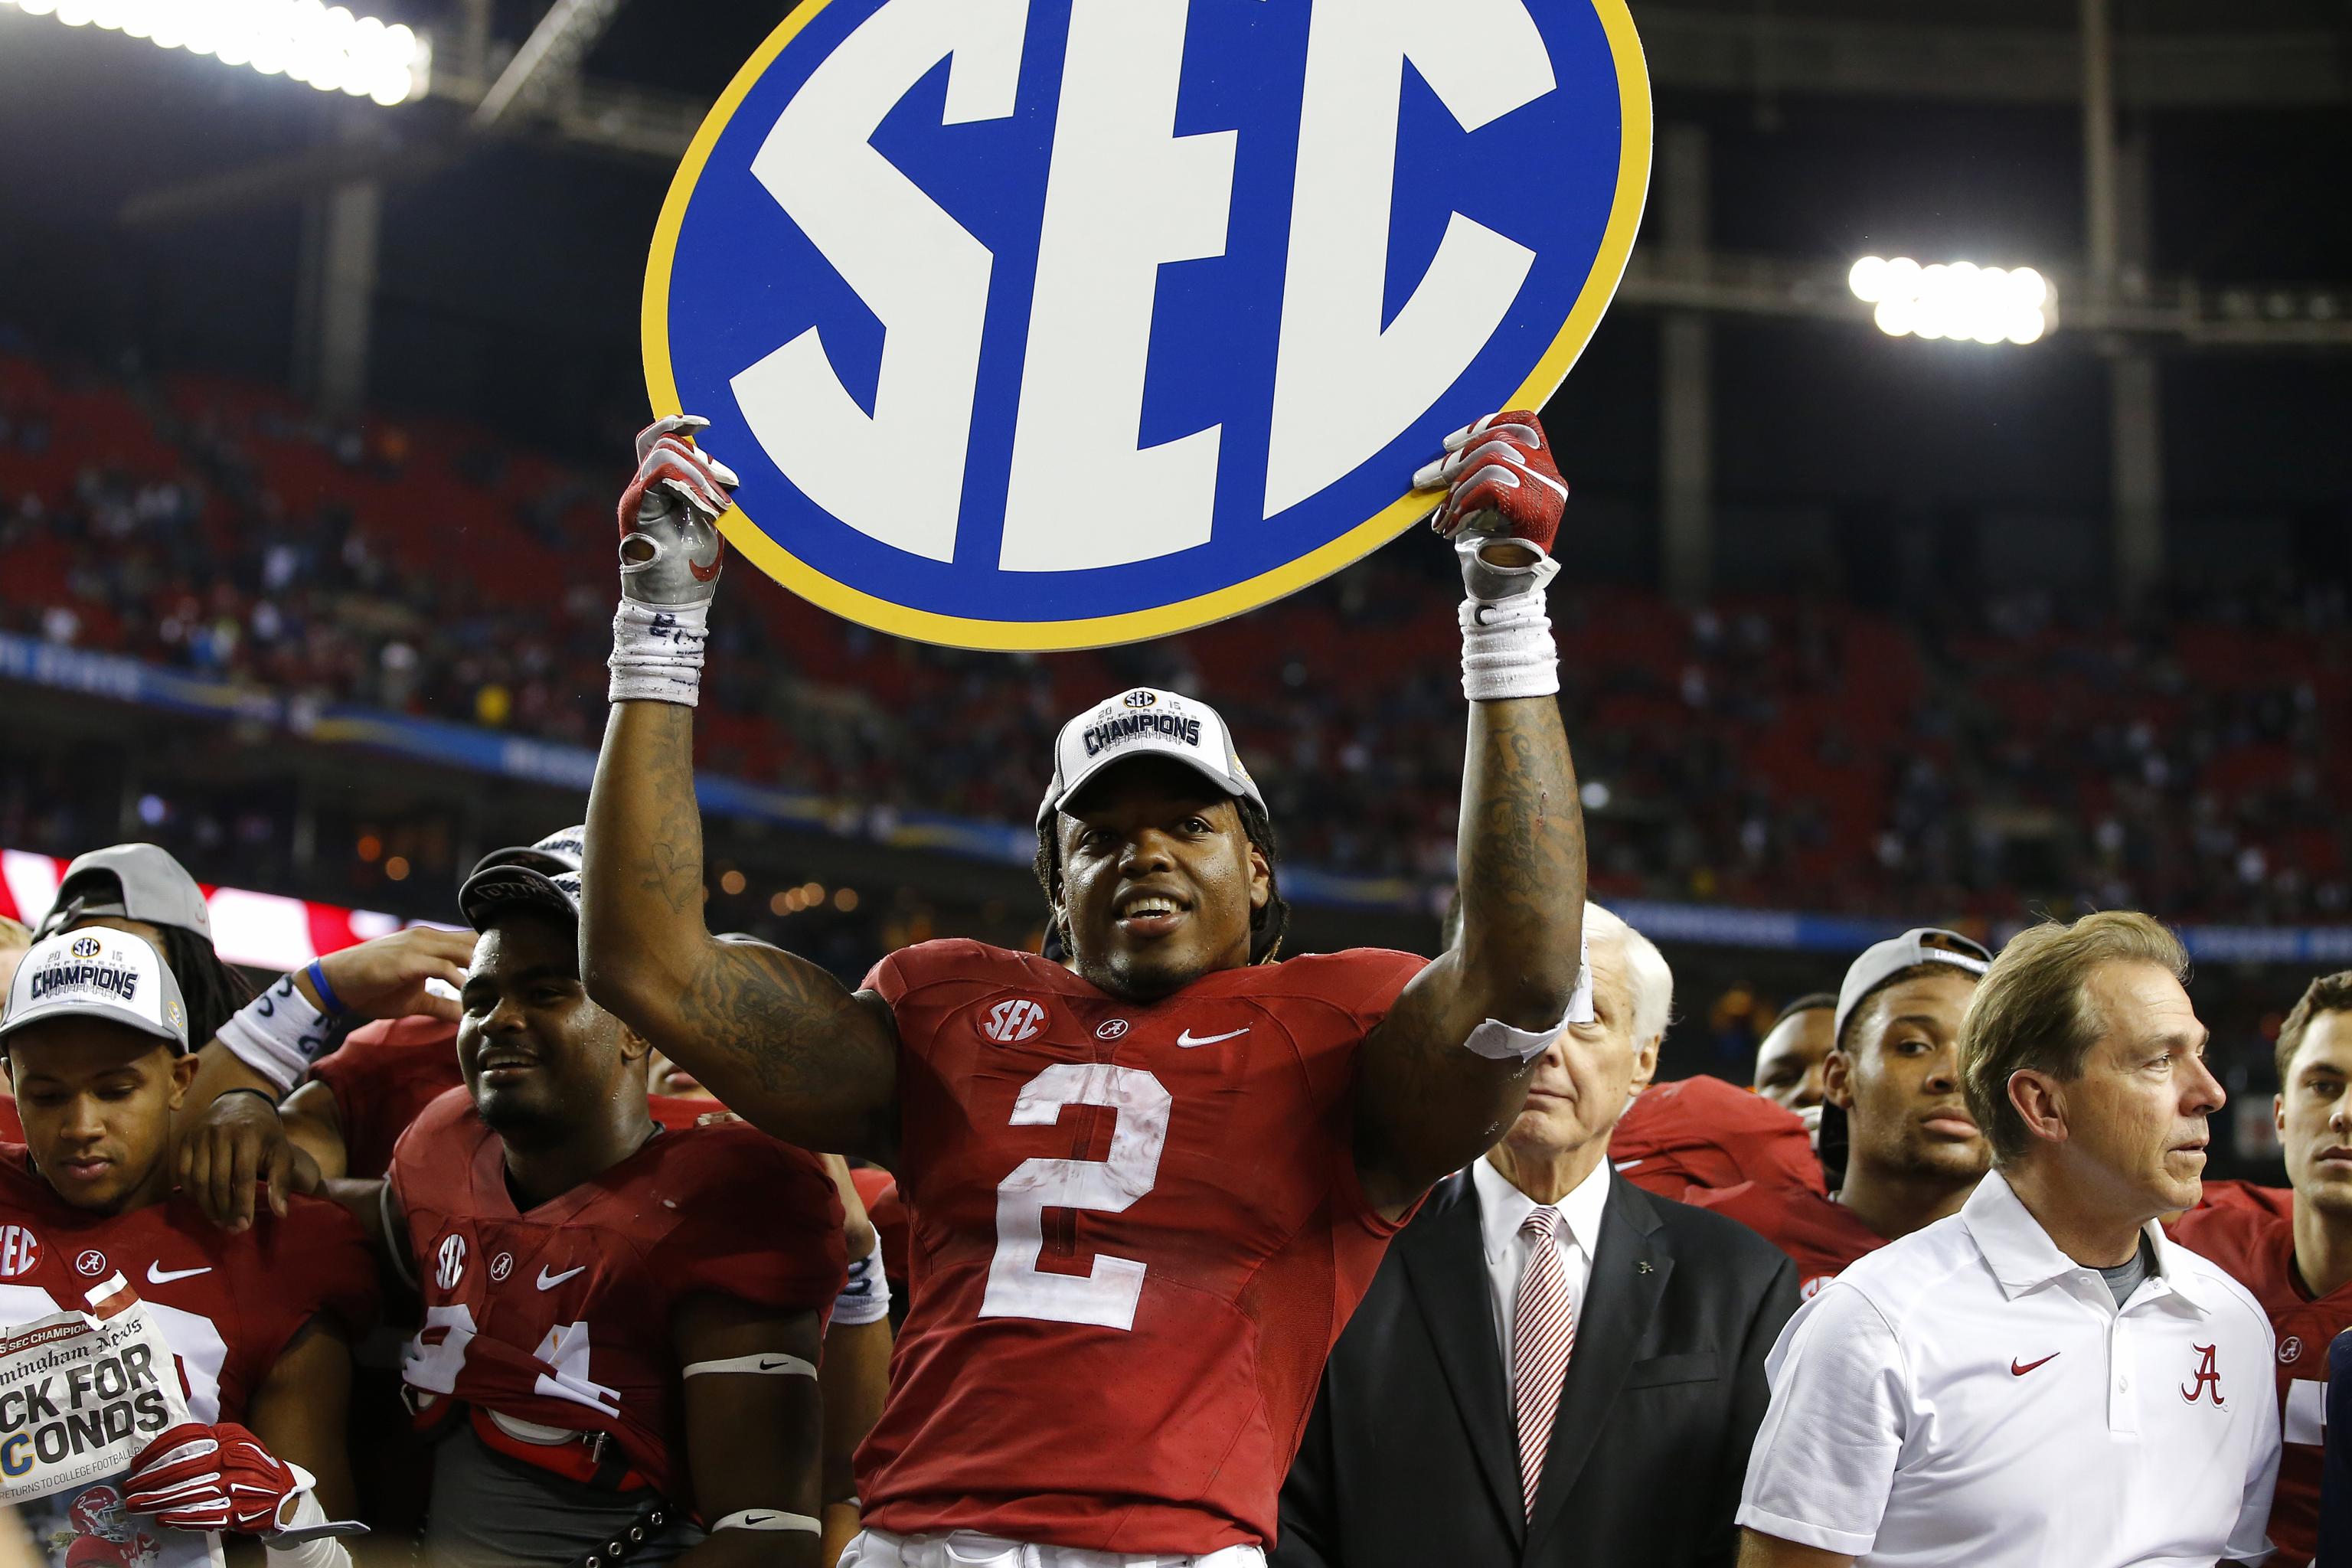 SEC Football Awards 2015 Results Full List of Winners and Reaction